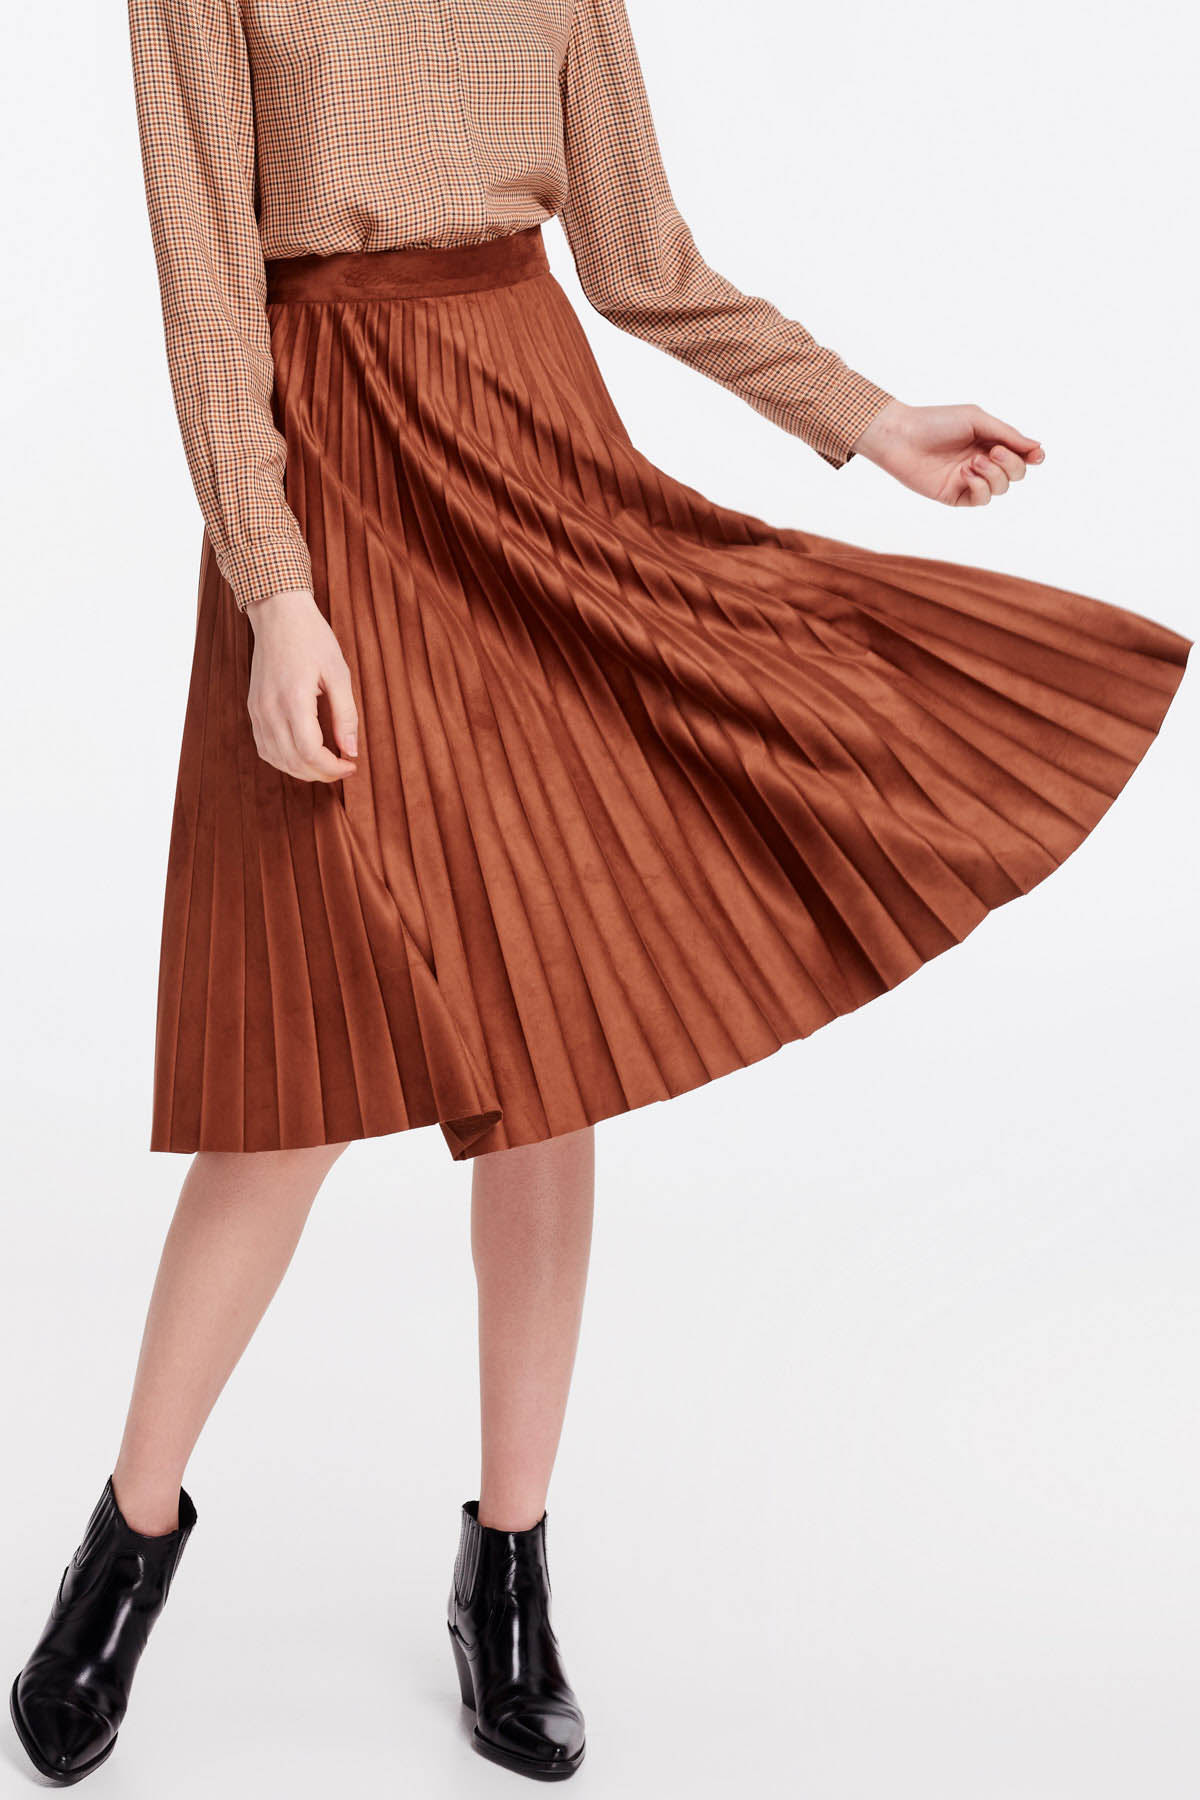 Brown suede pleated skirt, photo 2